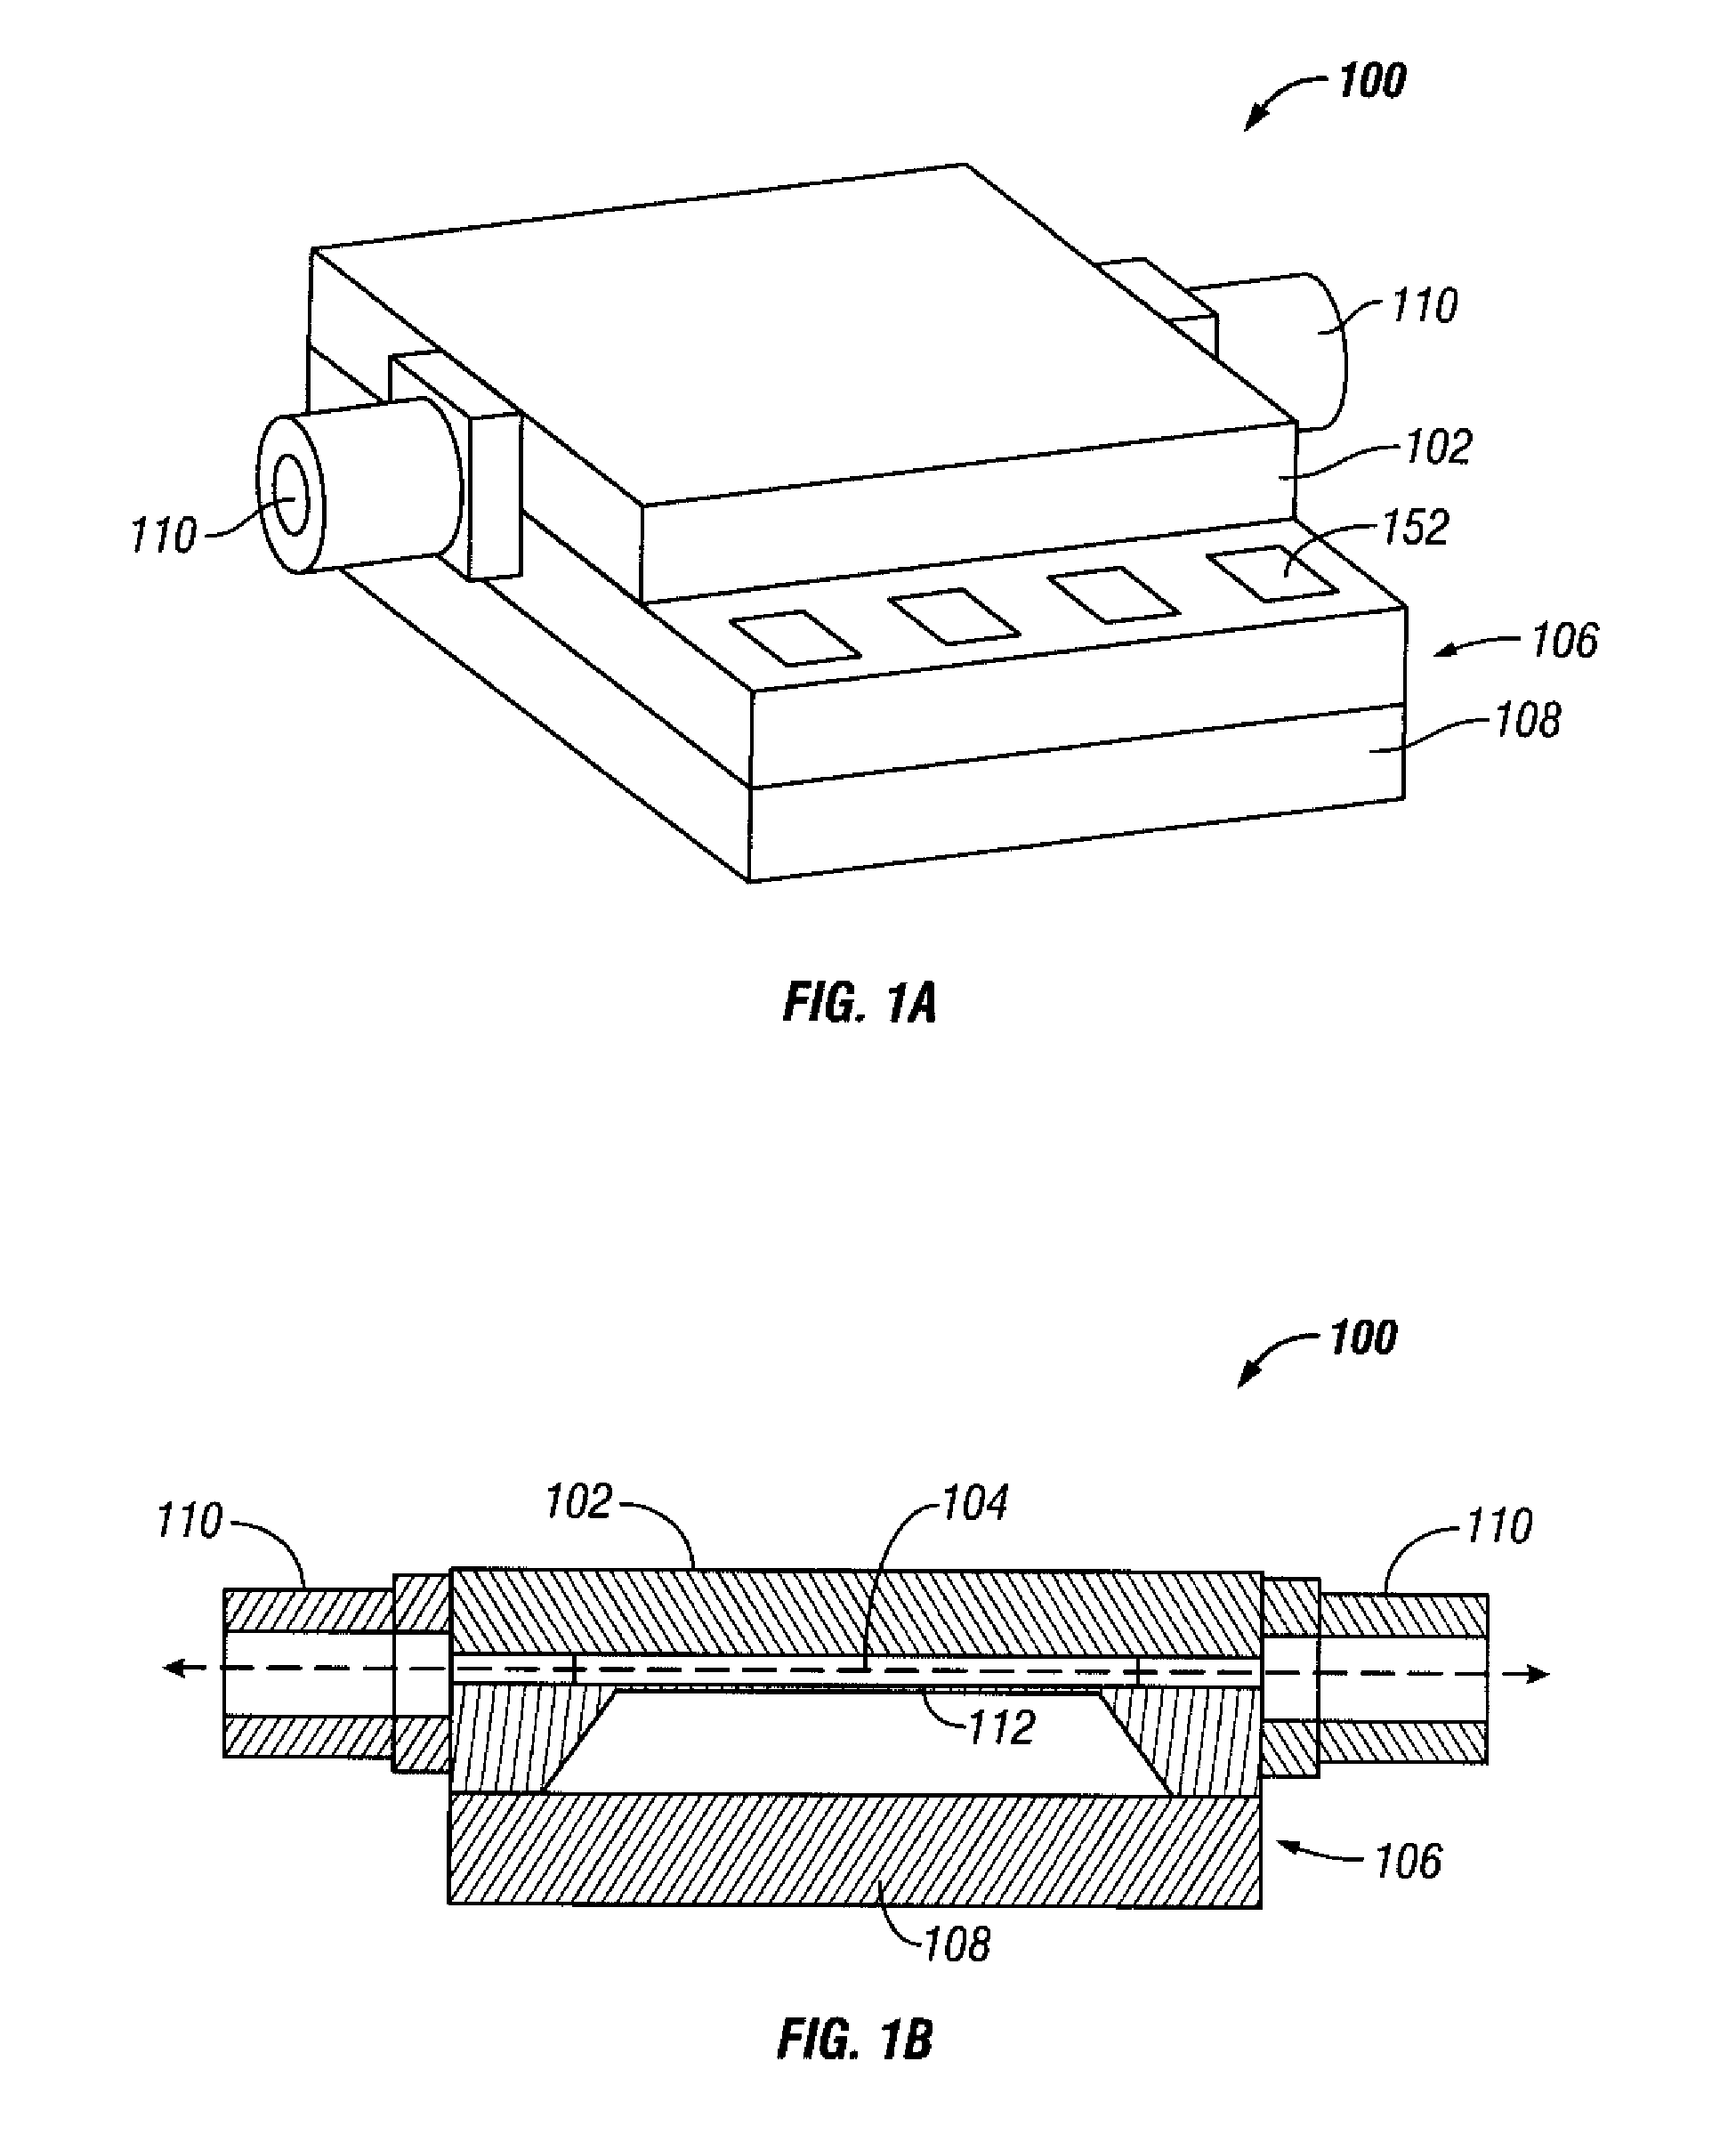 Flow sensor apparatus and method with media isolated electrical connections